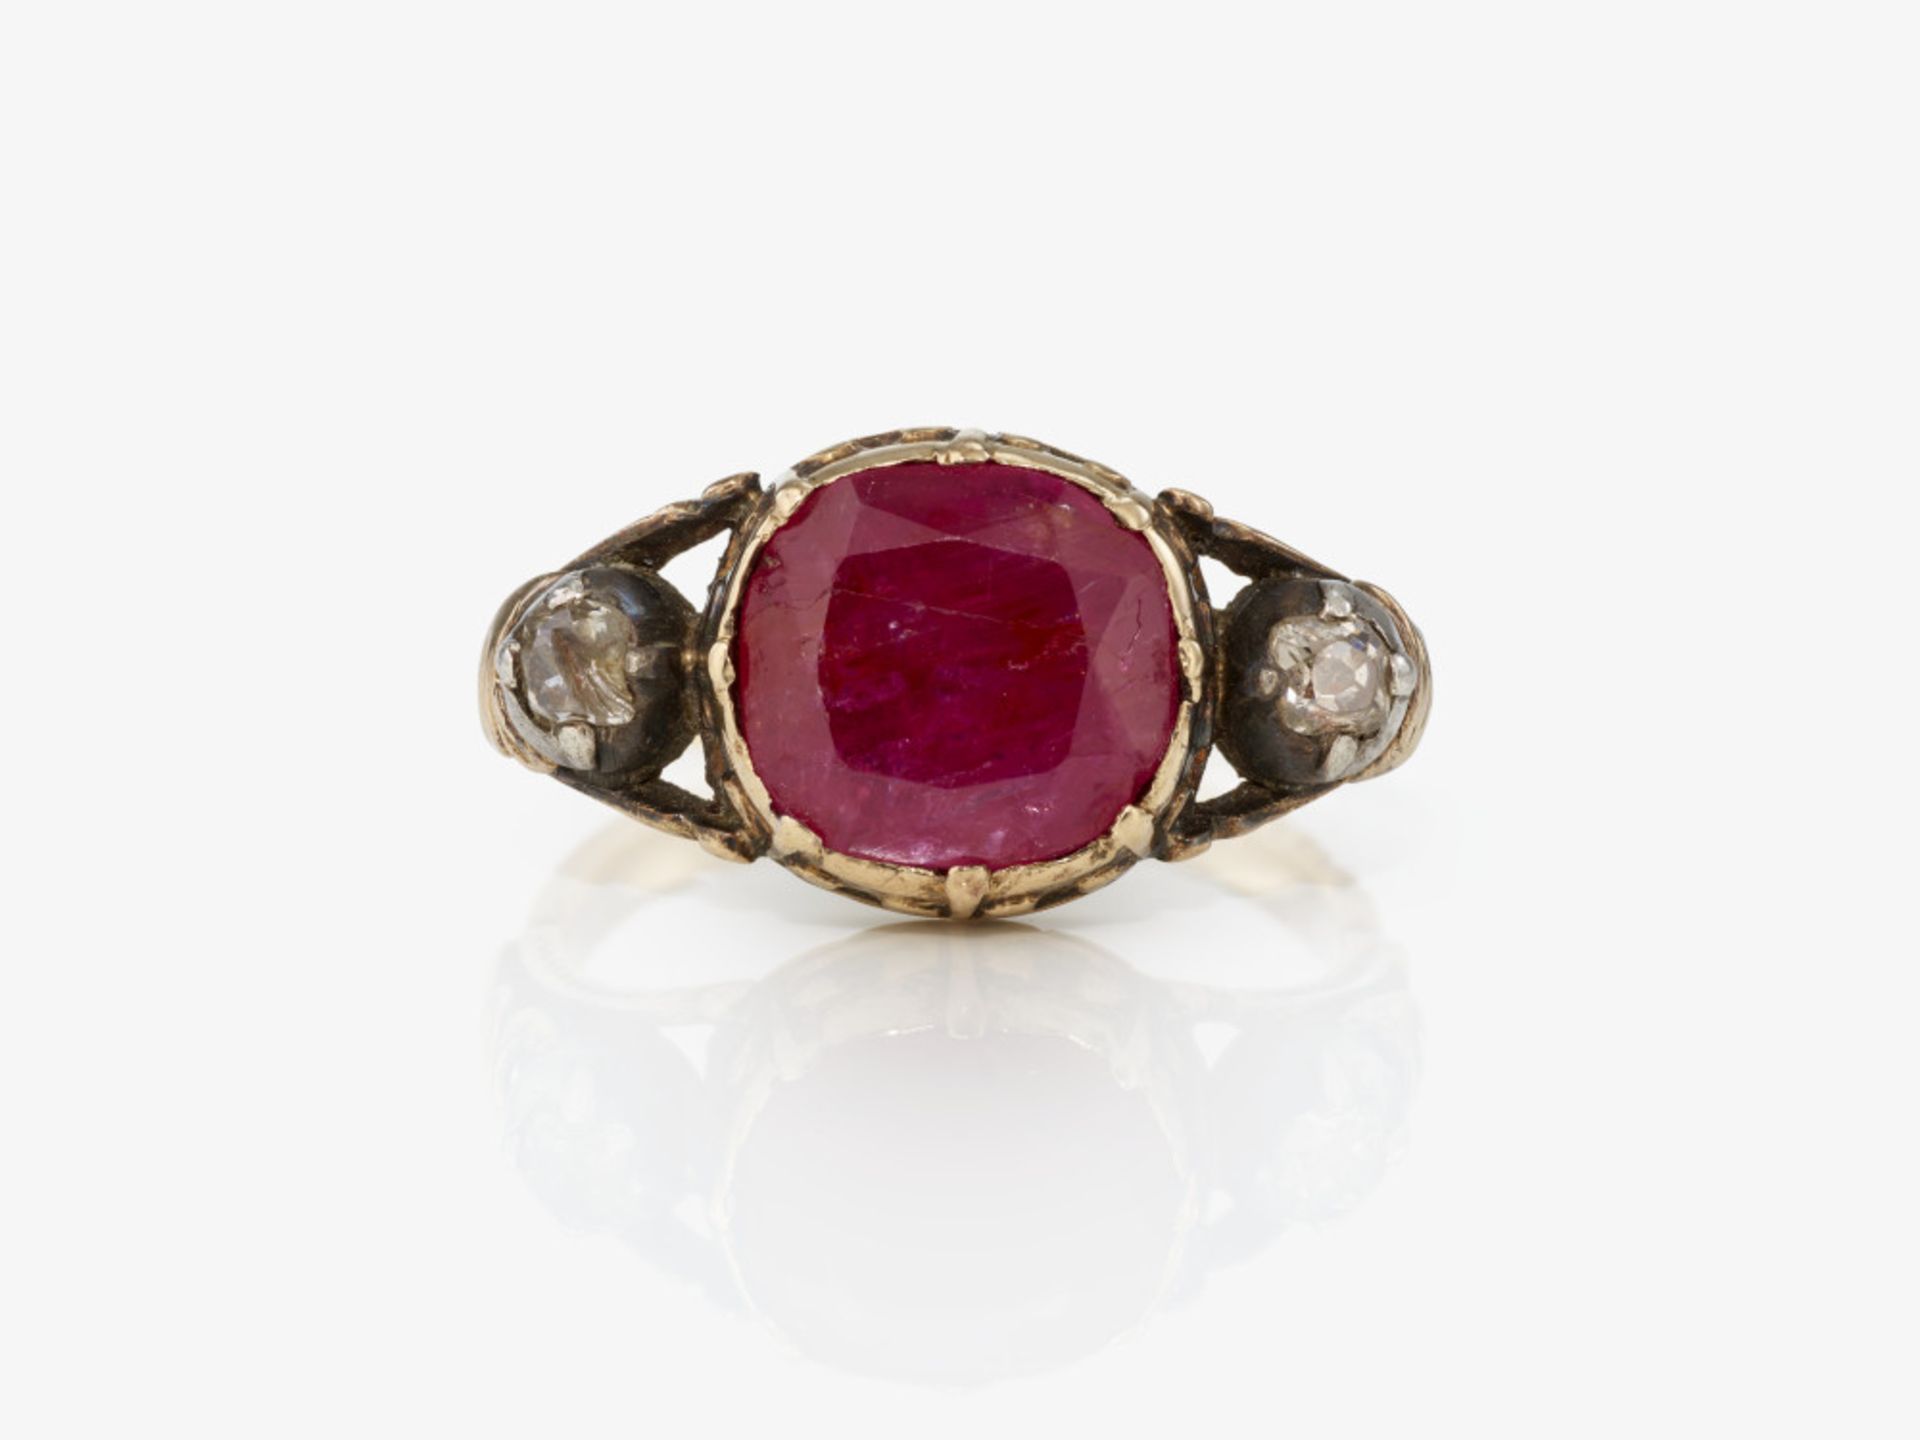 A ring with a ruby and 2 diamonds - Probably France, early 18th century - Image 2 of 2